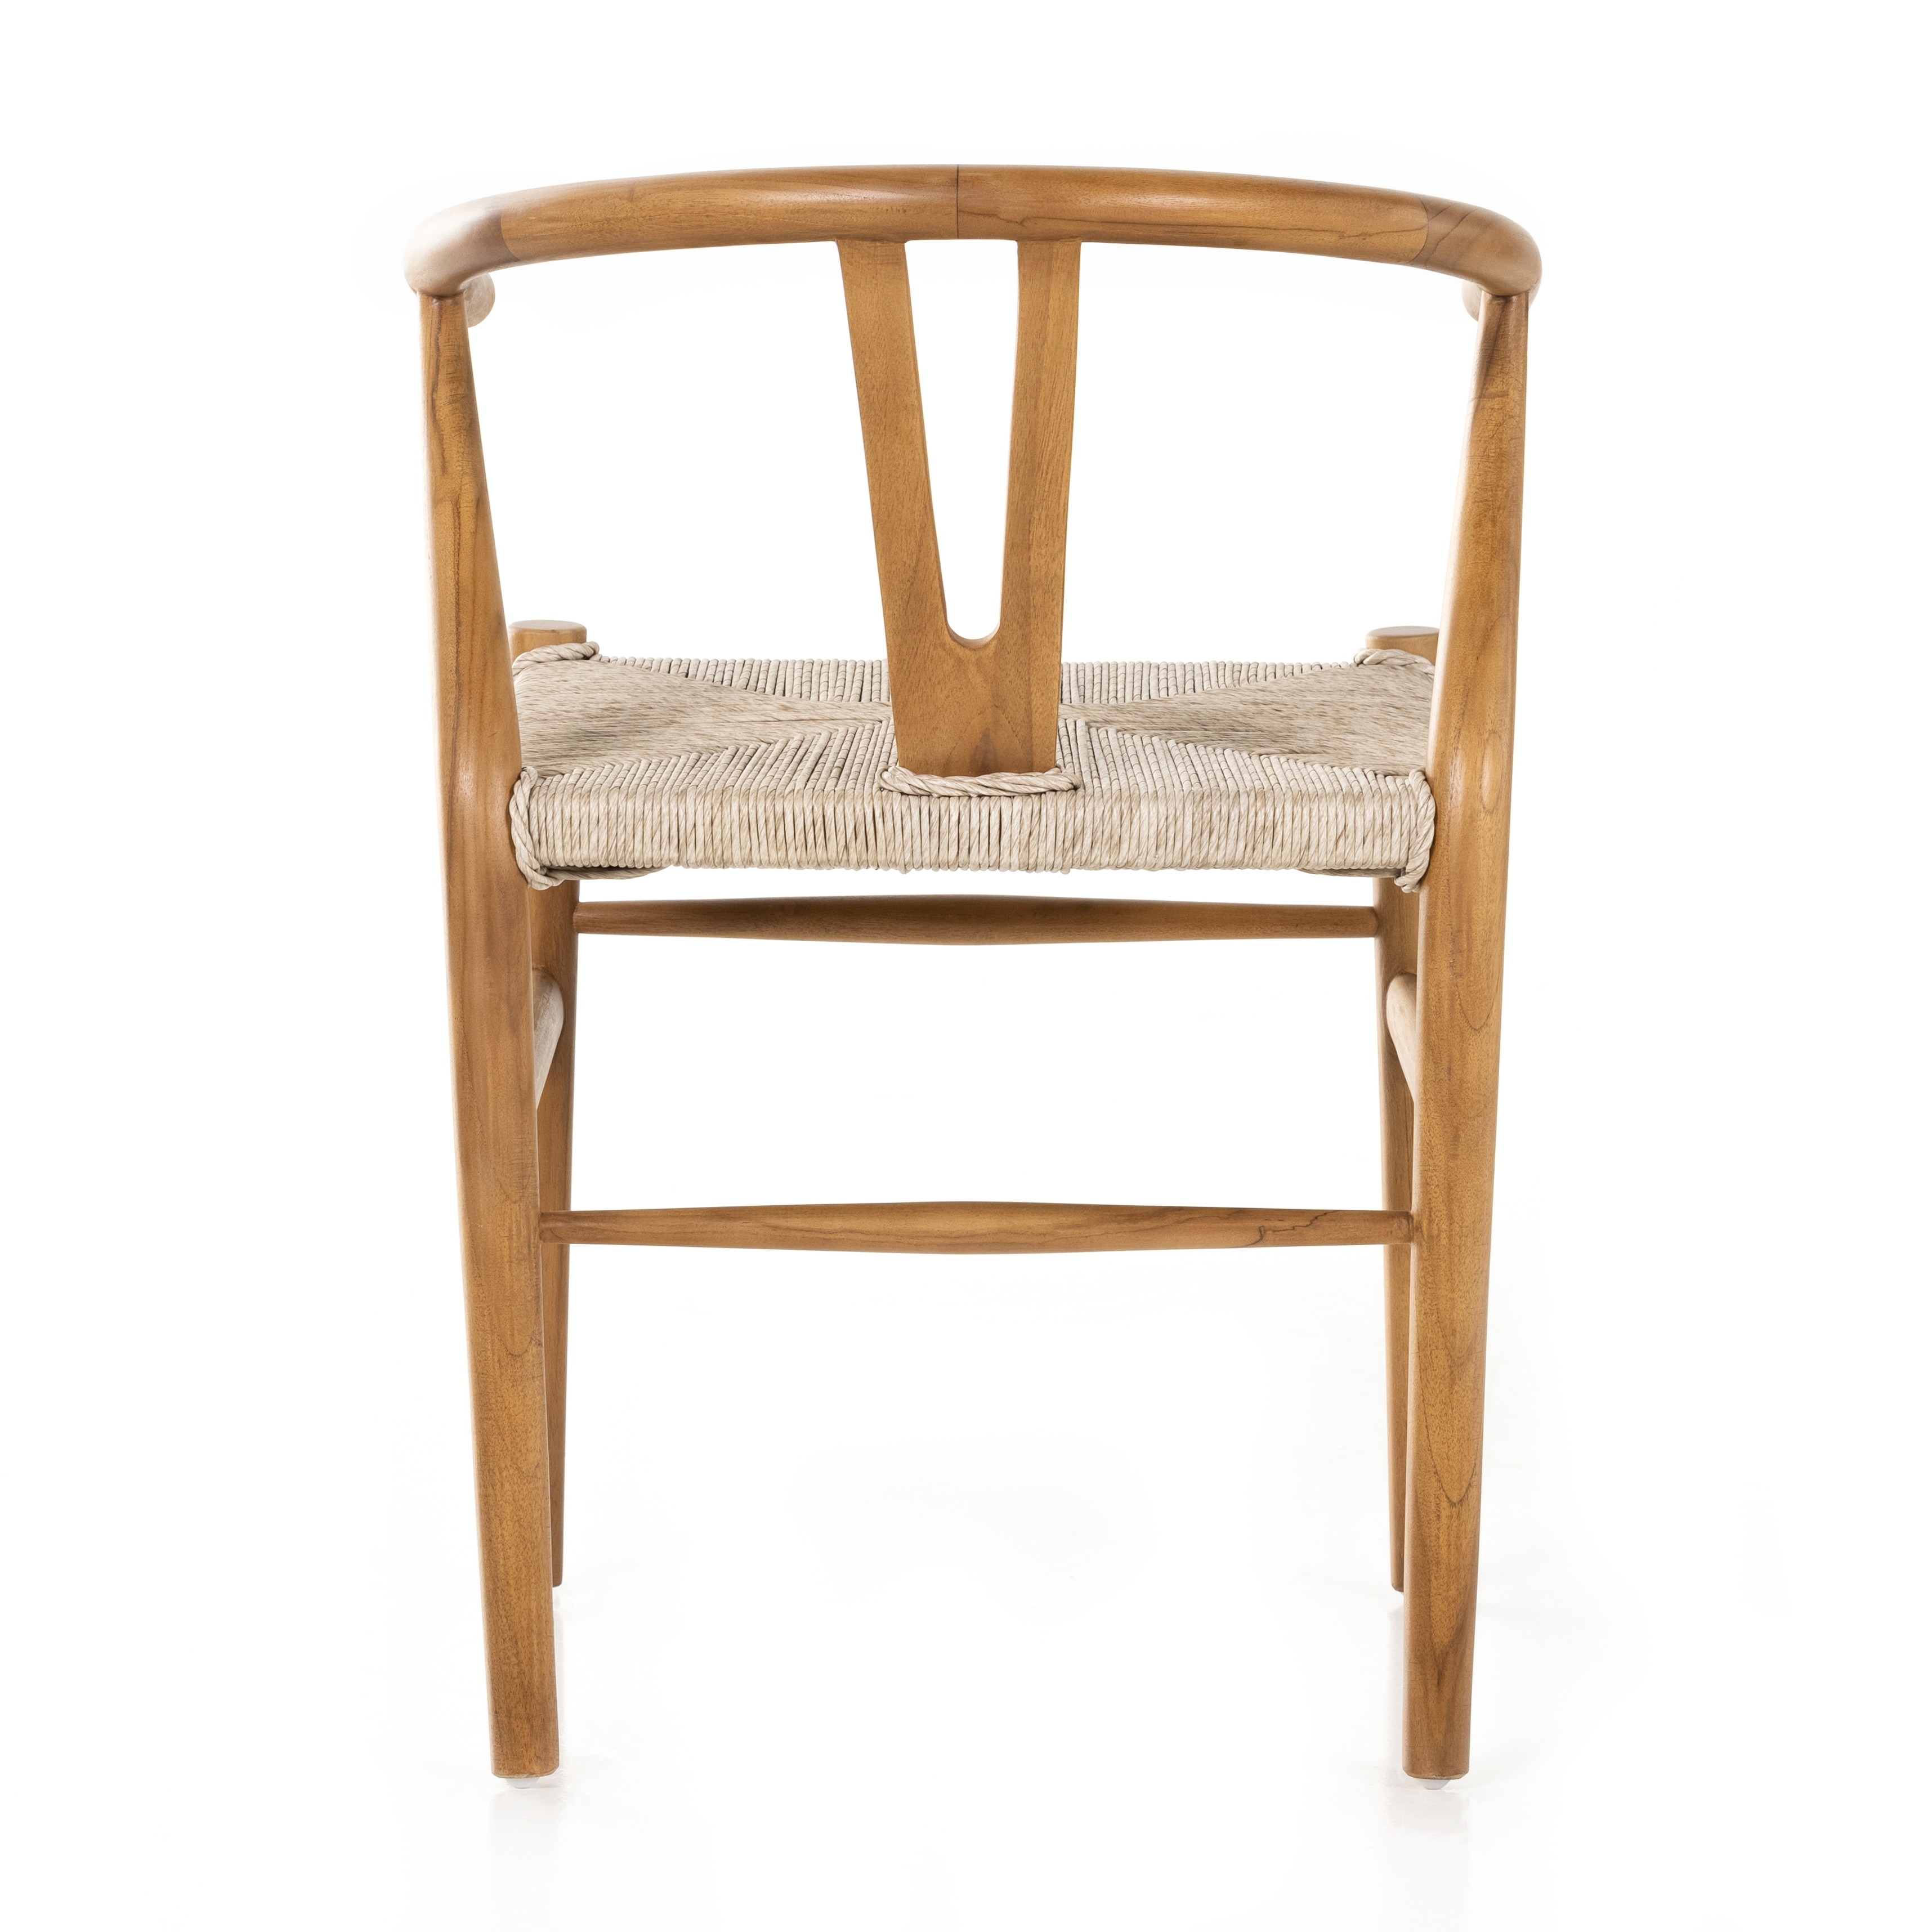 Muestra Dining Chair-Natural - Image 4